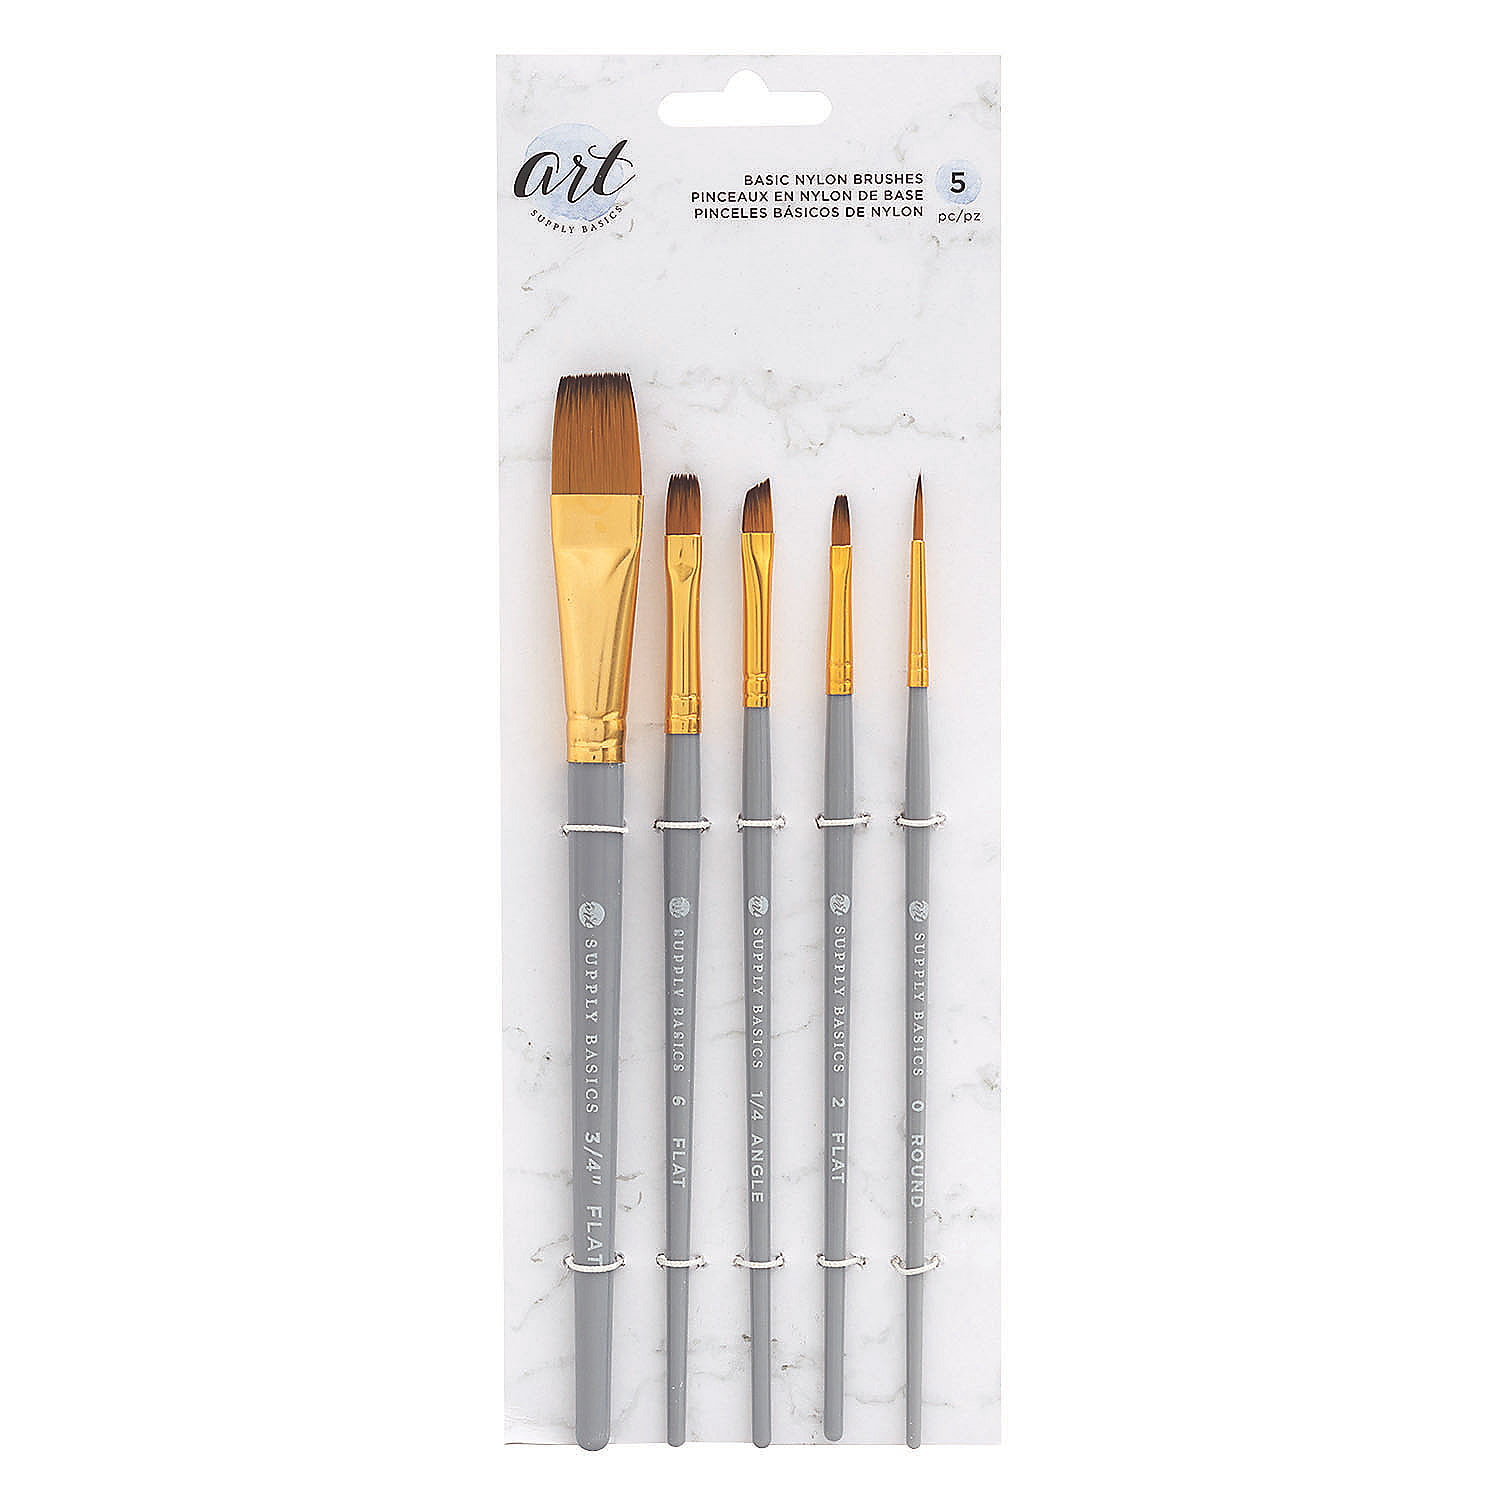  Xubox Paint Brushes Set, 10 Pieces Round Pointed Tip